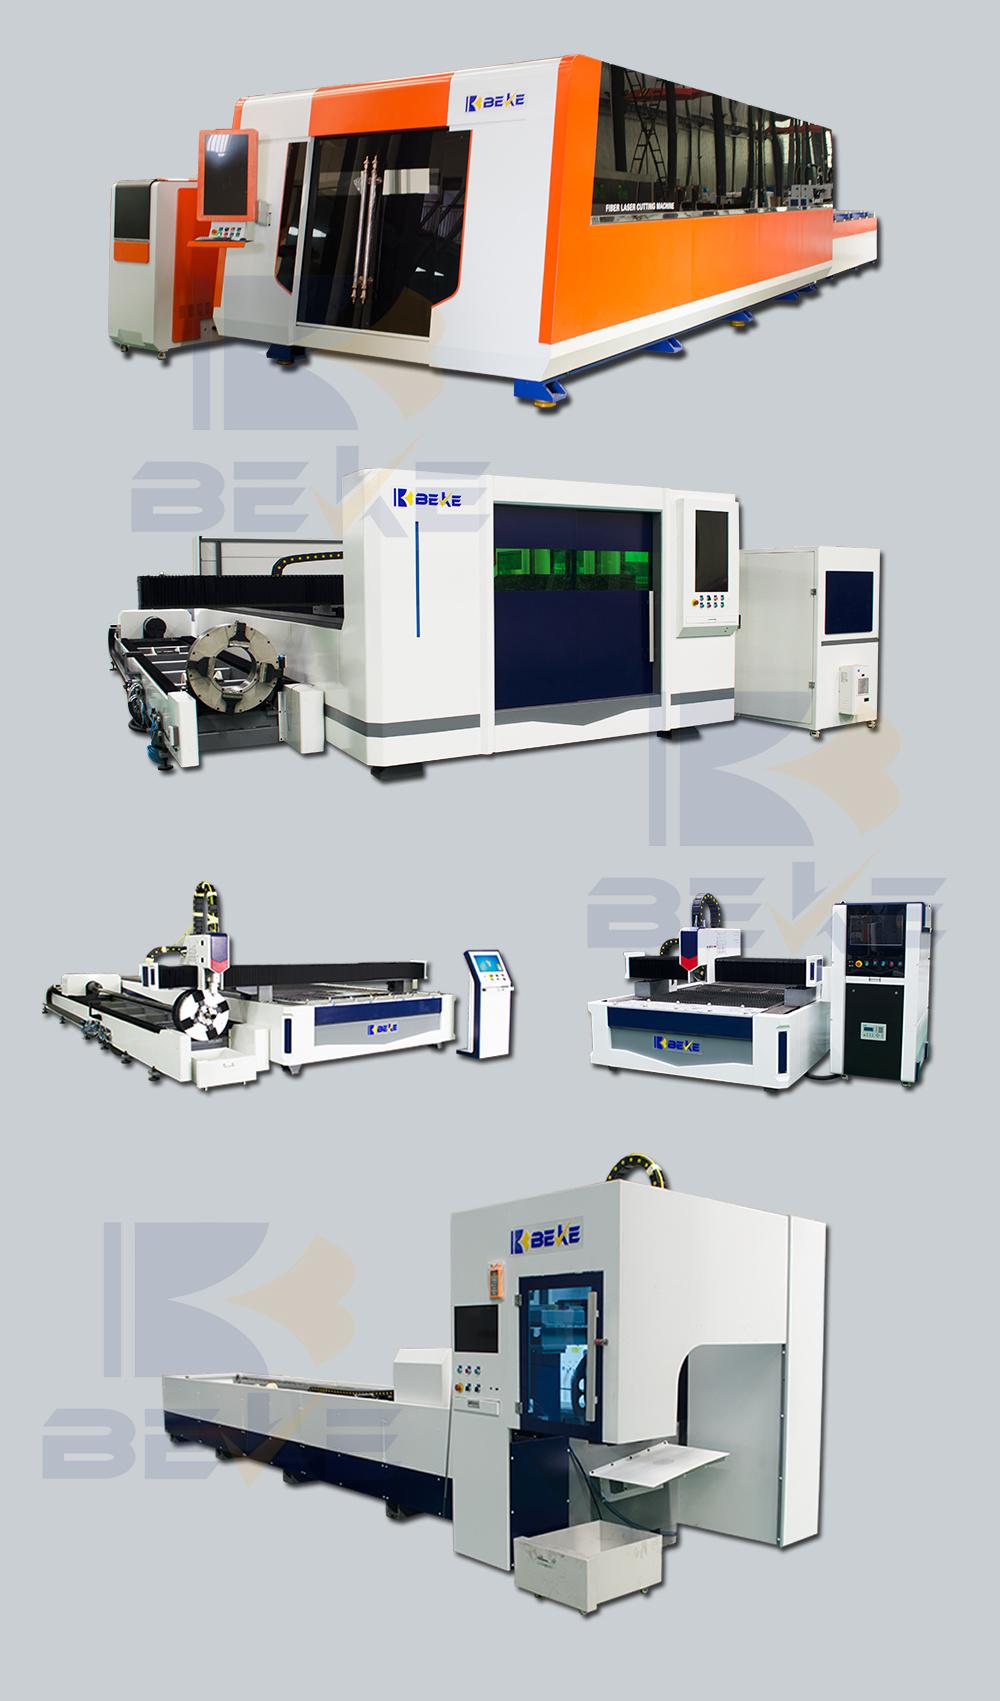 Beke Brand Best Selling 4015 1500W Metal Sheet Tube and Plate Laser Cutting Machine Factroy Price